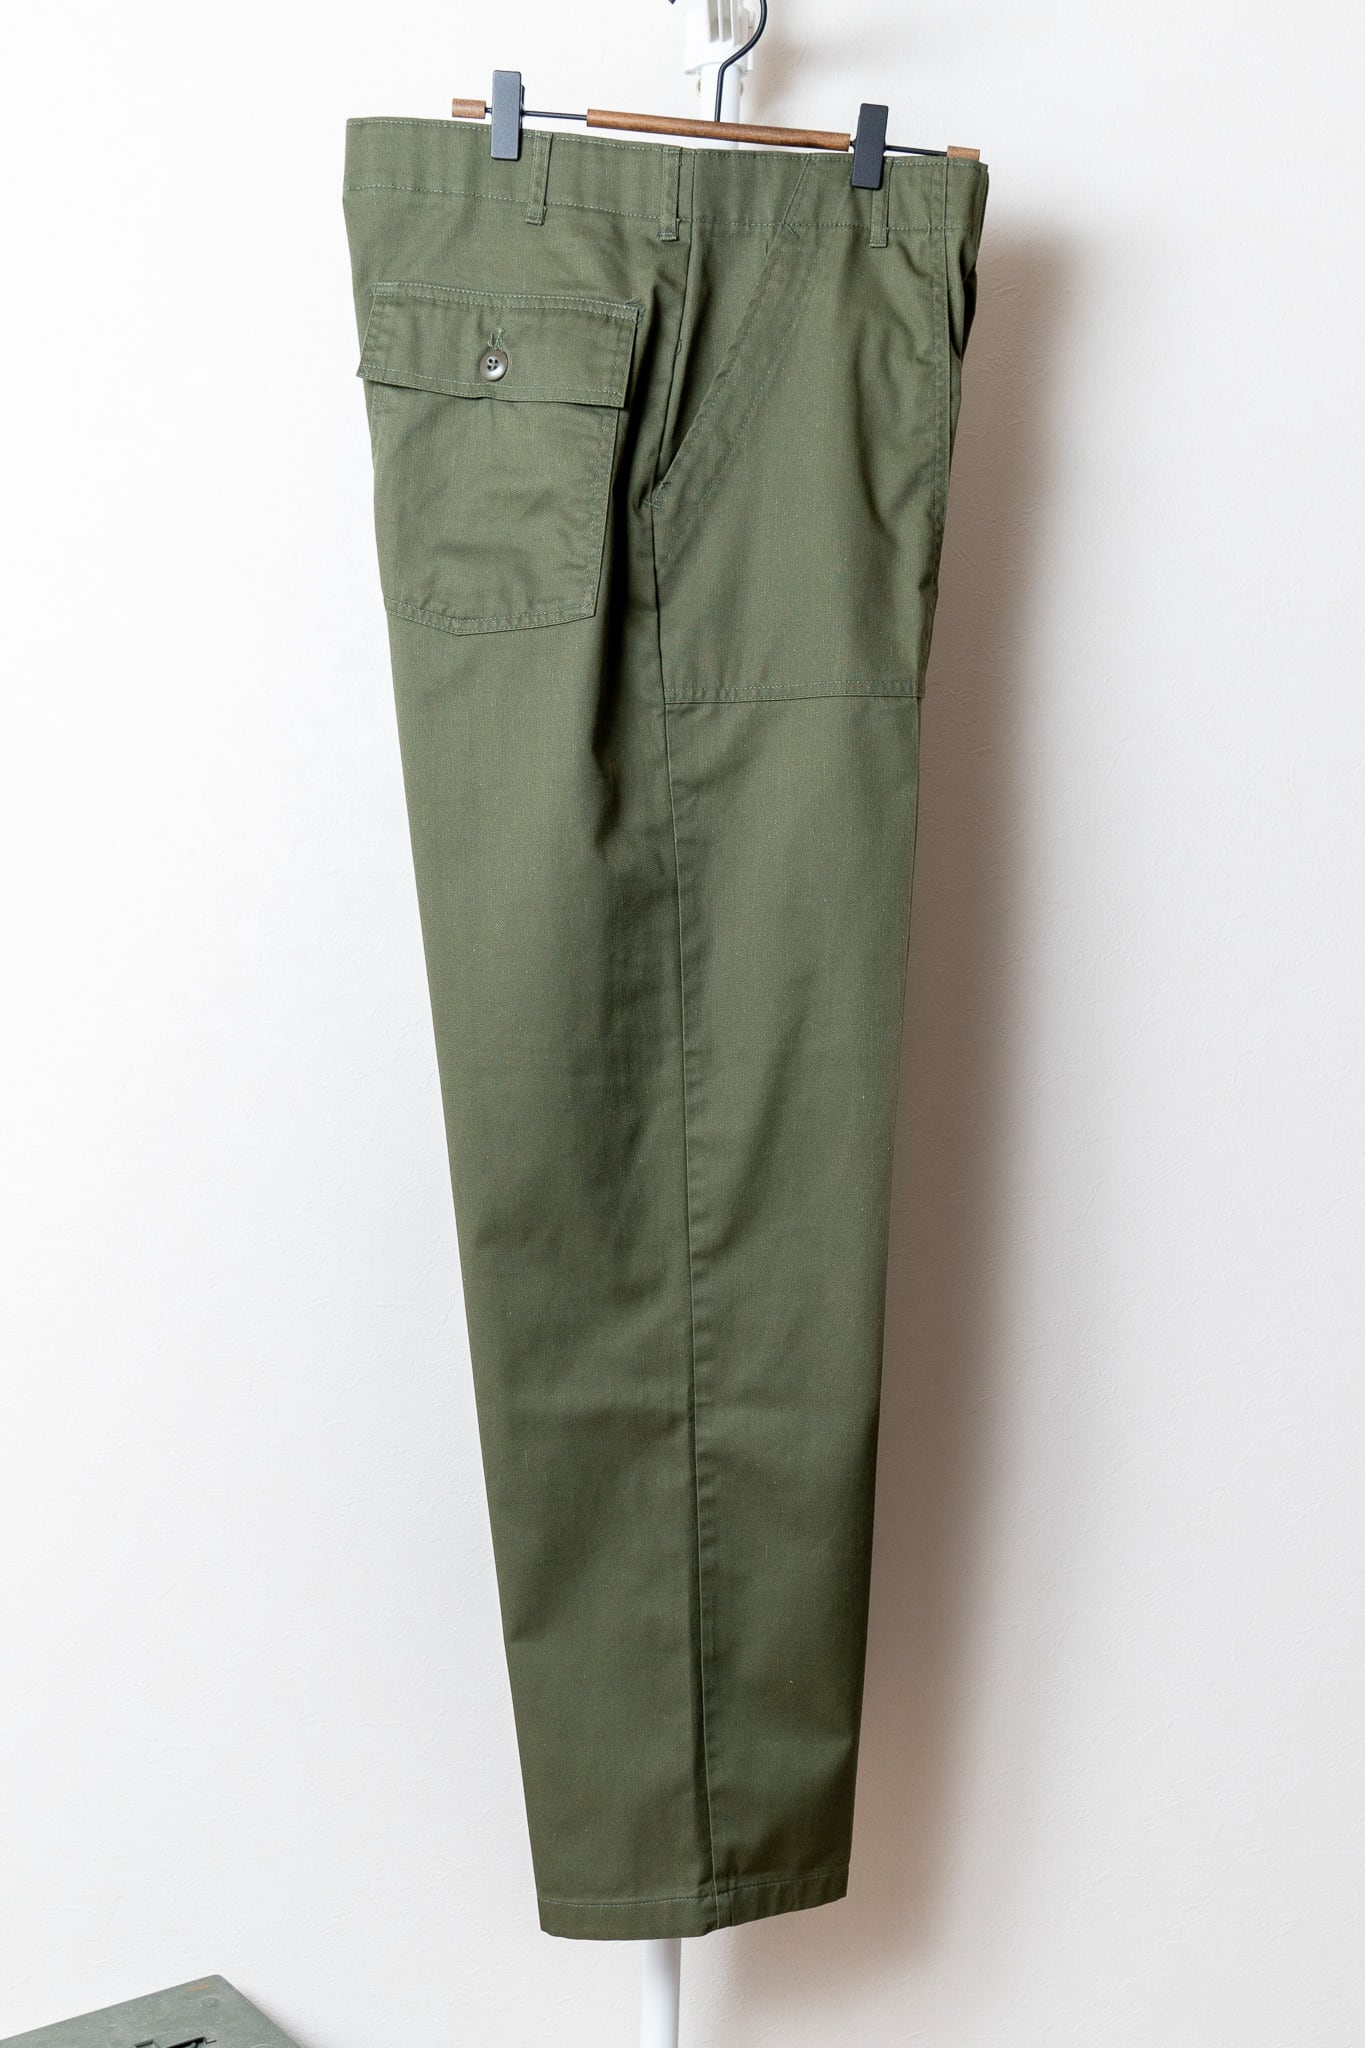 USED】U.S.Army Utility Trousers OG-507 実物 米軍 ベイカーパンツ